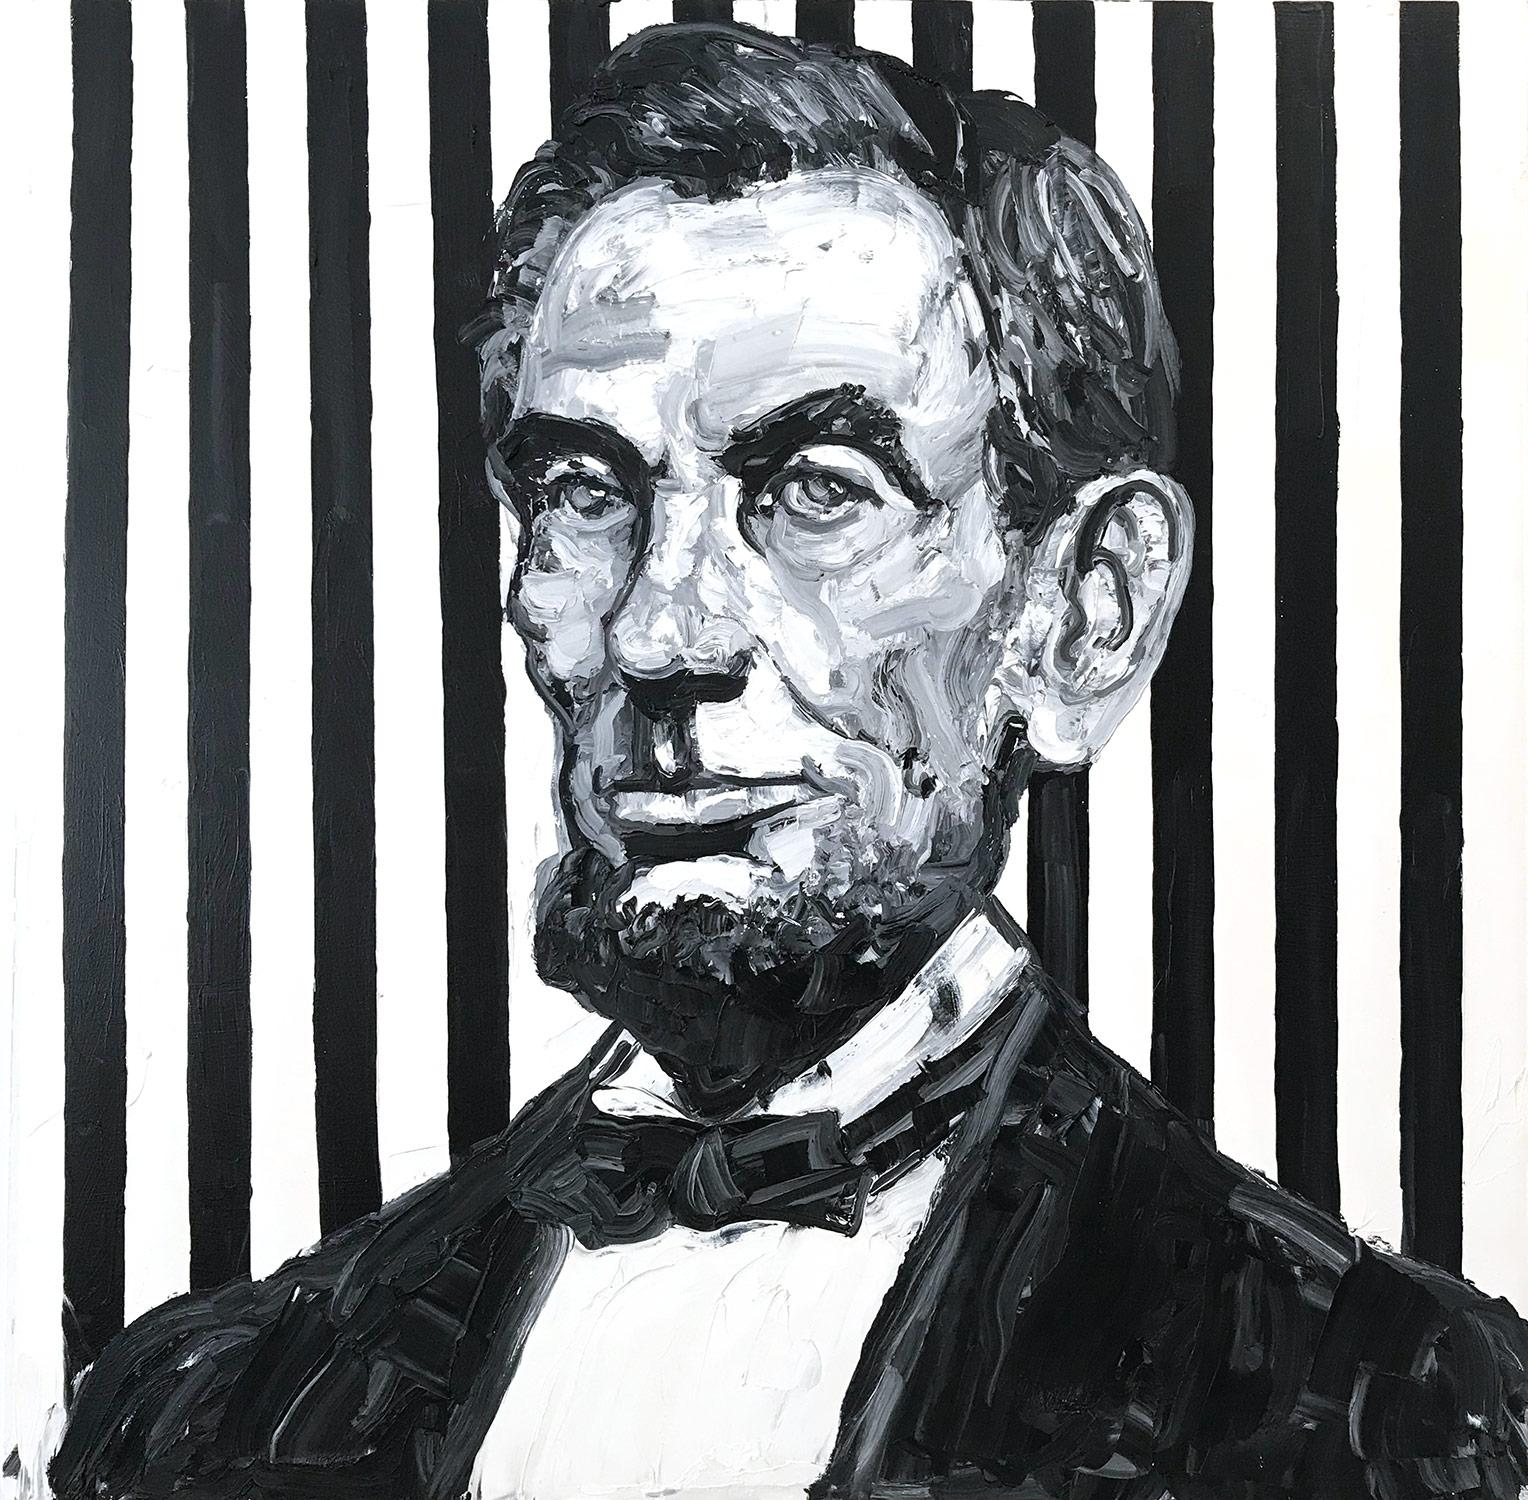 "Lincoln" (Neo-Expressionist Oil Painting in Black and White on Canvas)